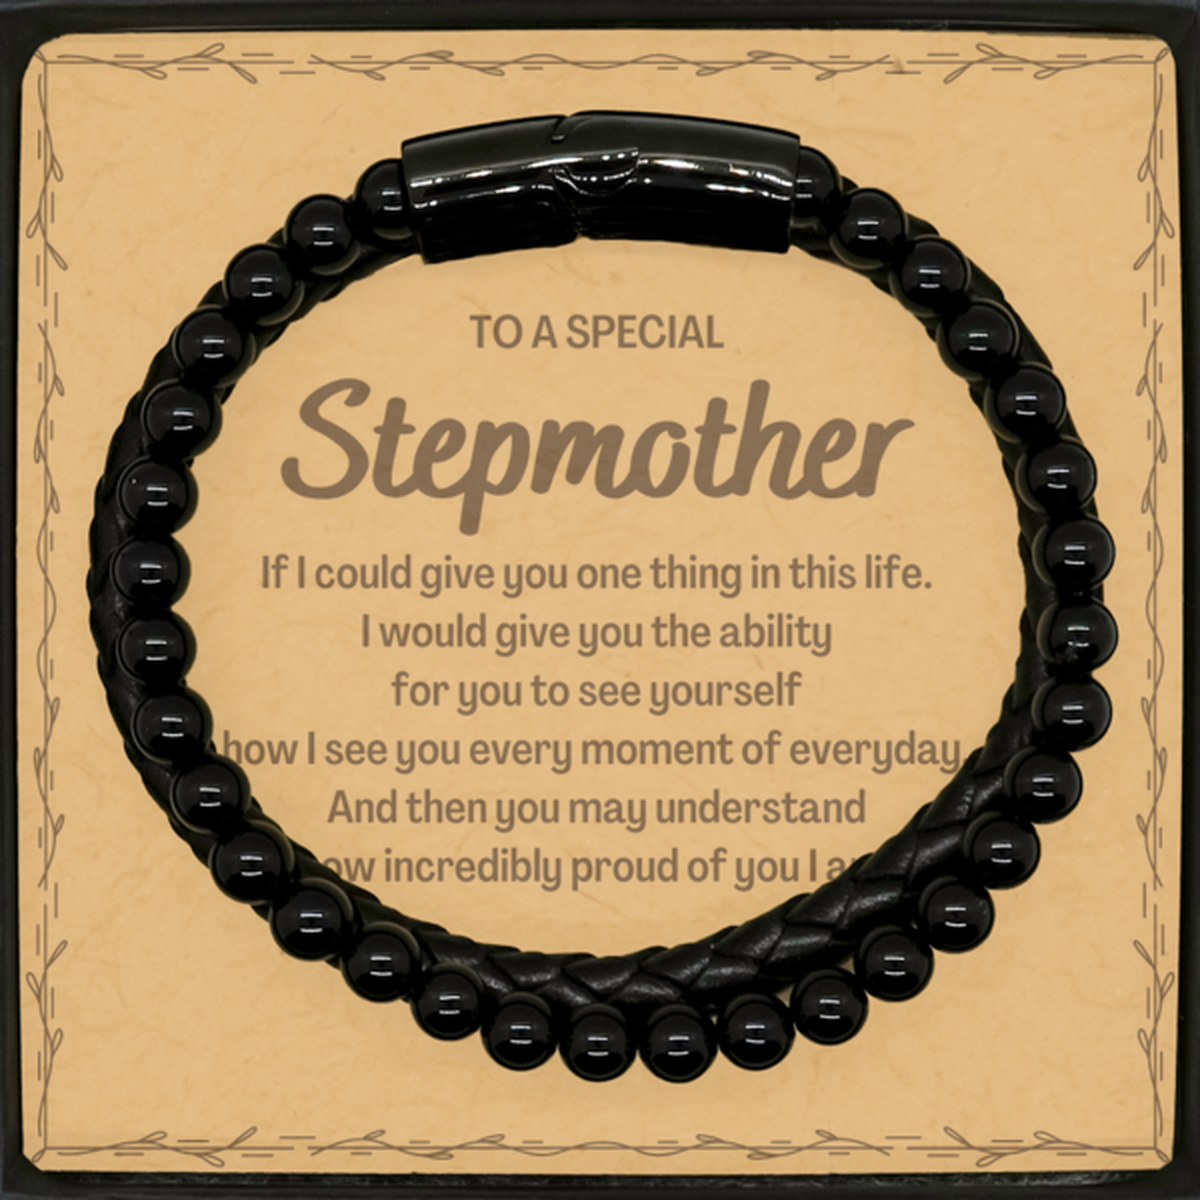 To My Stepmother Stone Leather Bracelets, Gifts For Stepmother Message Card, Inspirational Gifts for Christmas Birthday, Epic Gifts for Stepmother To A Special Stepmother how incredibly proud of you I am